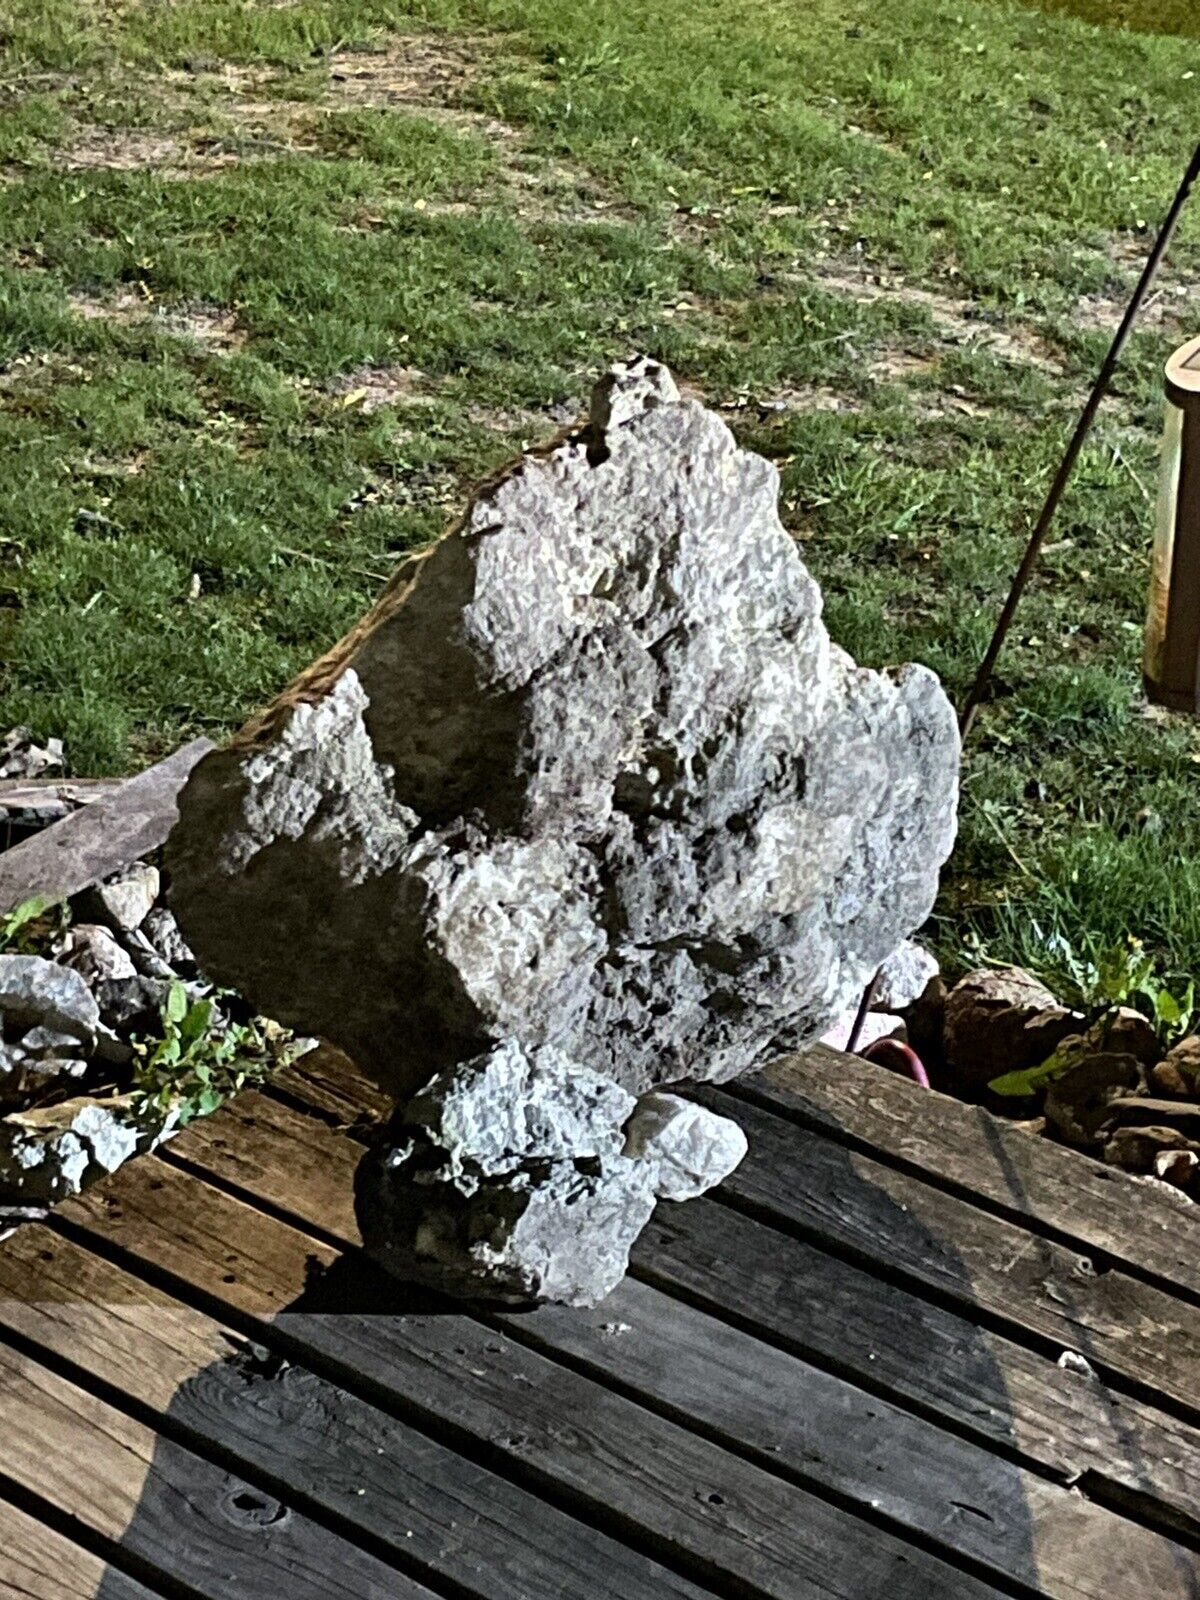 Extremely large Geode.